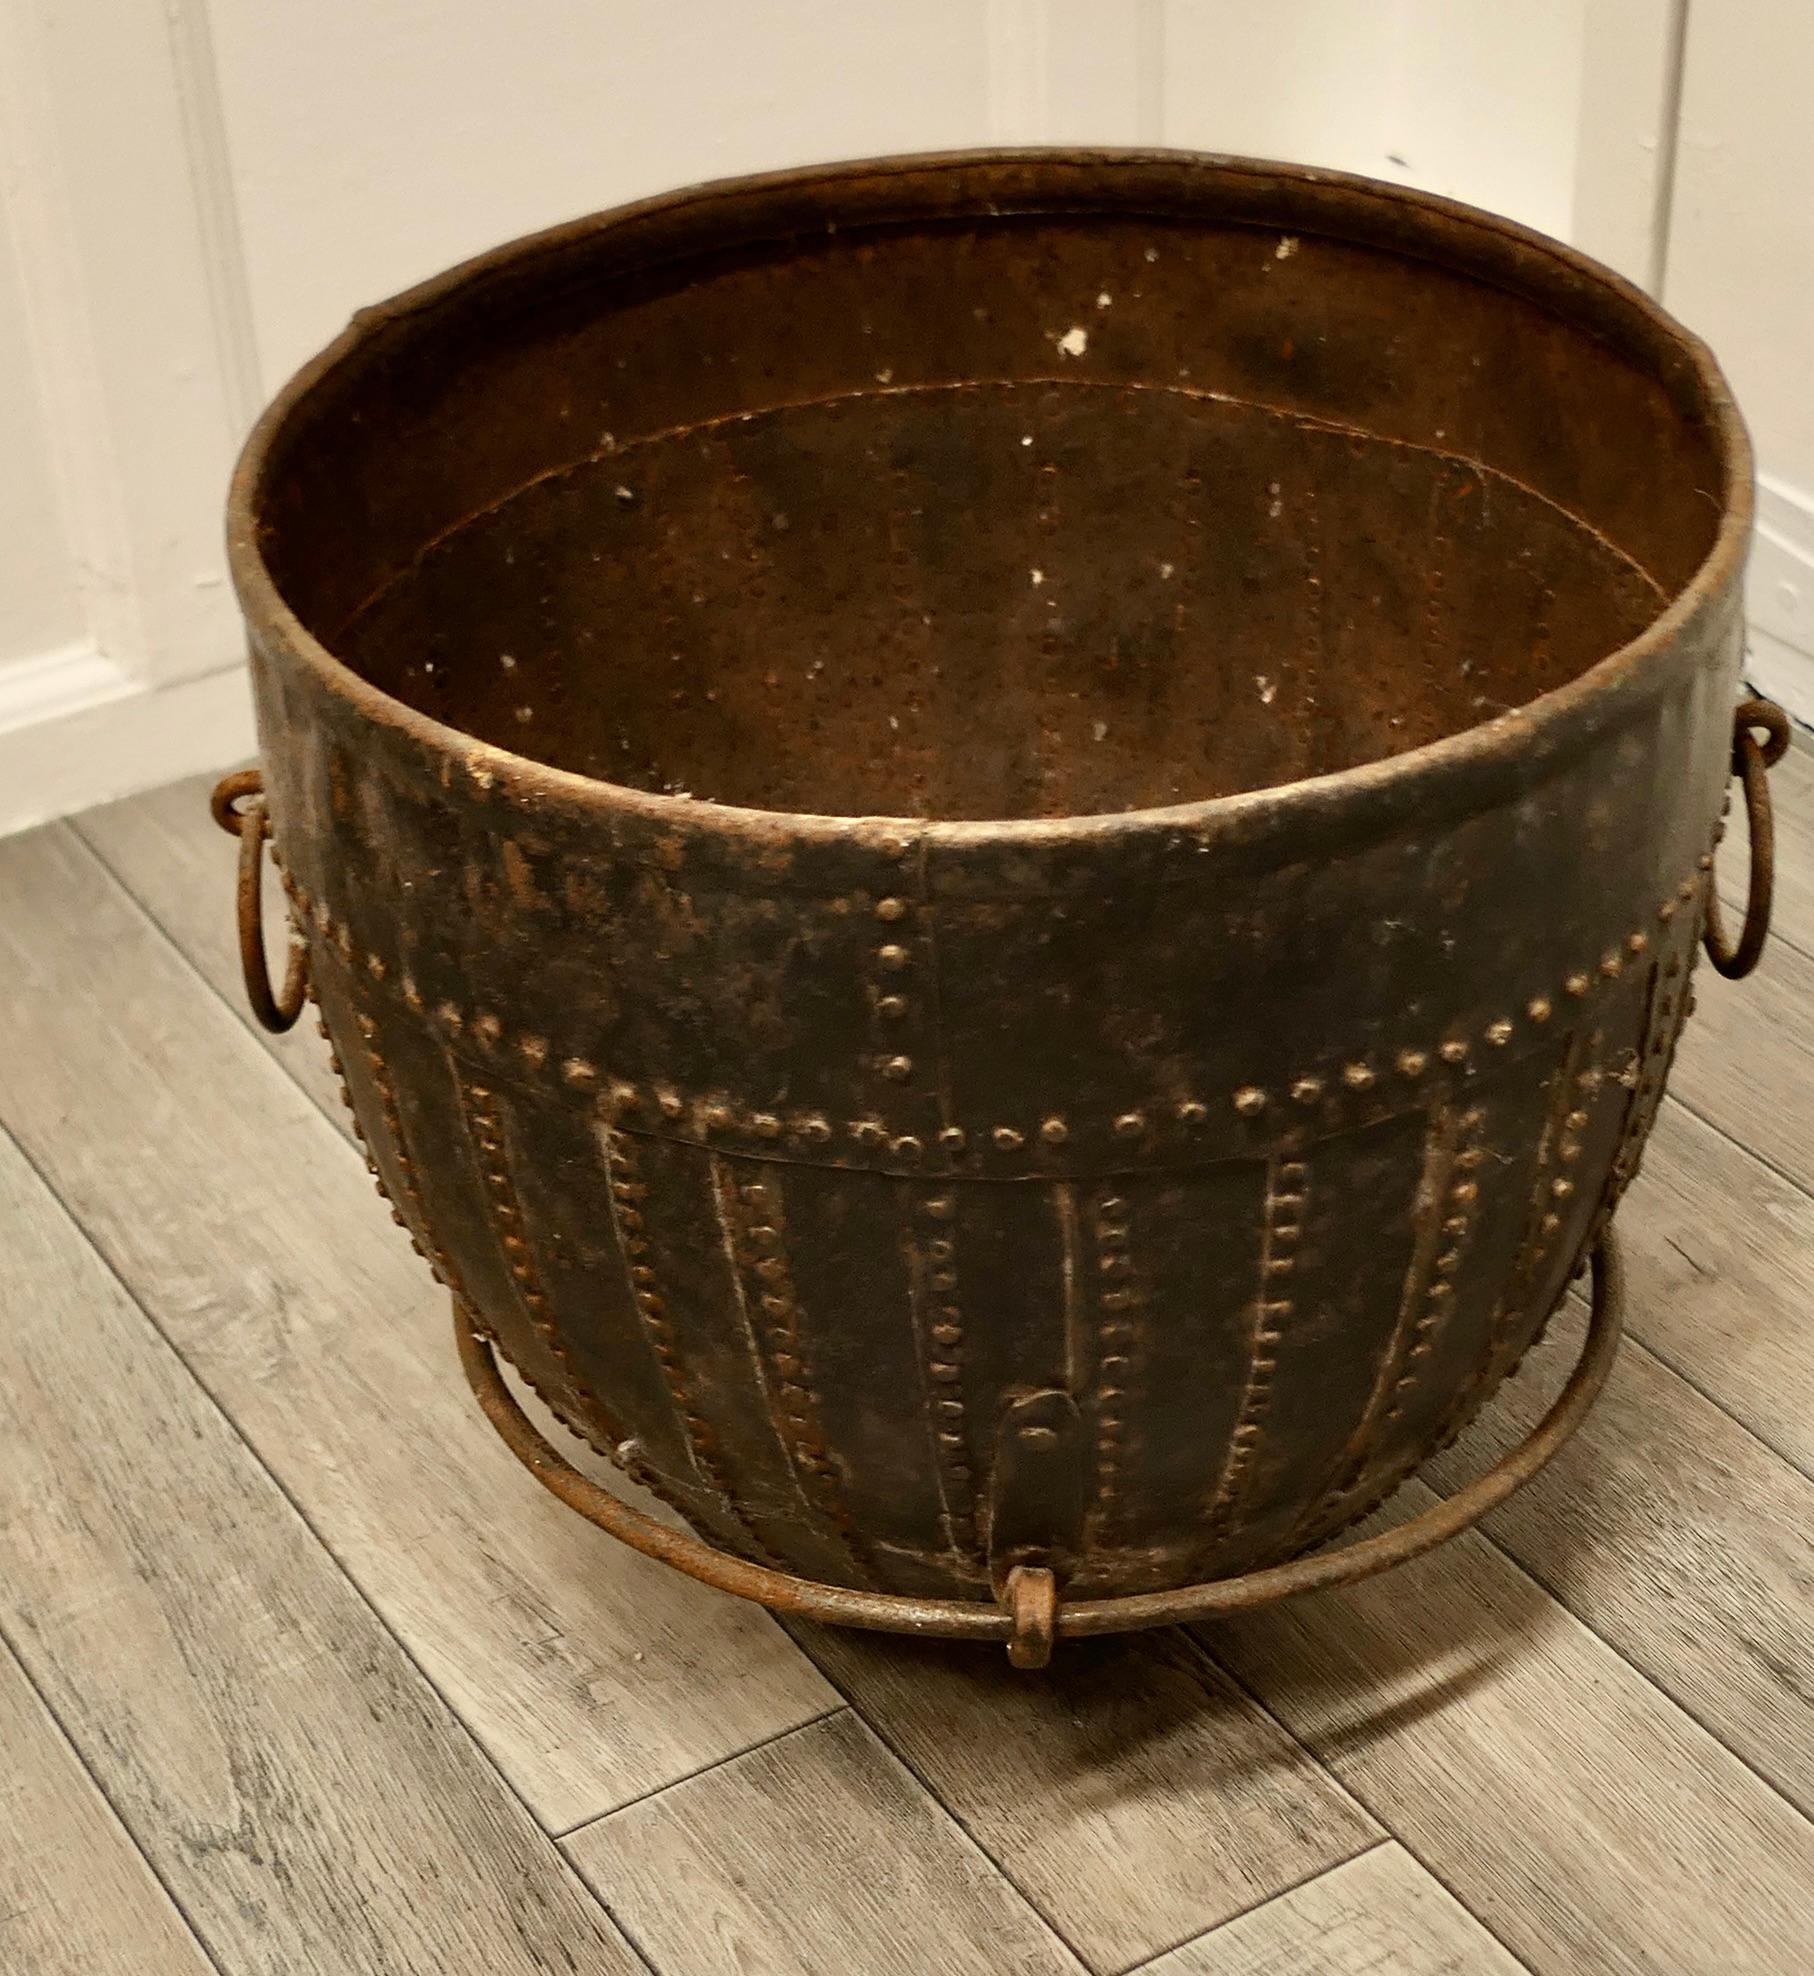 19th Century North African cooking pot, Brutalist log basket.

Stud and Riveted Cooking Pot from North Africa, the vessel is made in hand forged Iron, it has 2 ring carrying handles

An amazing piece, the main body is made up with layered